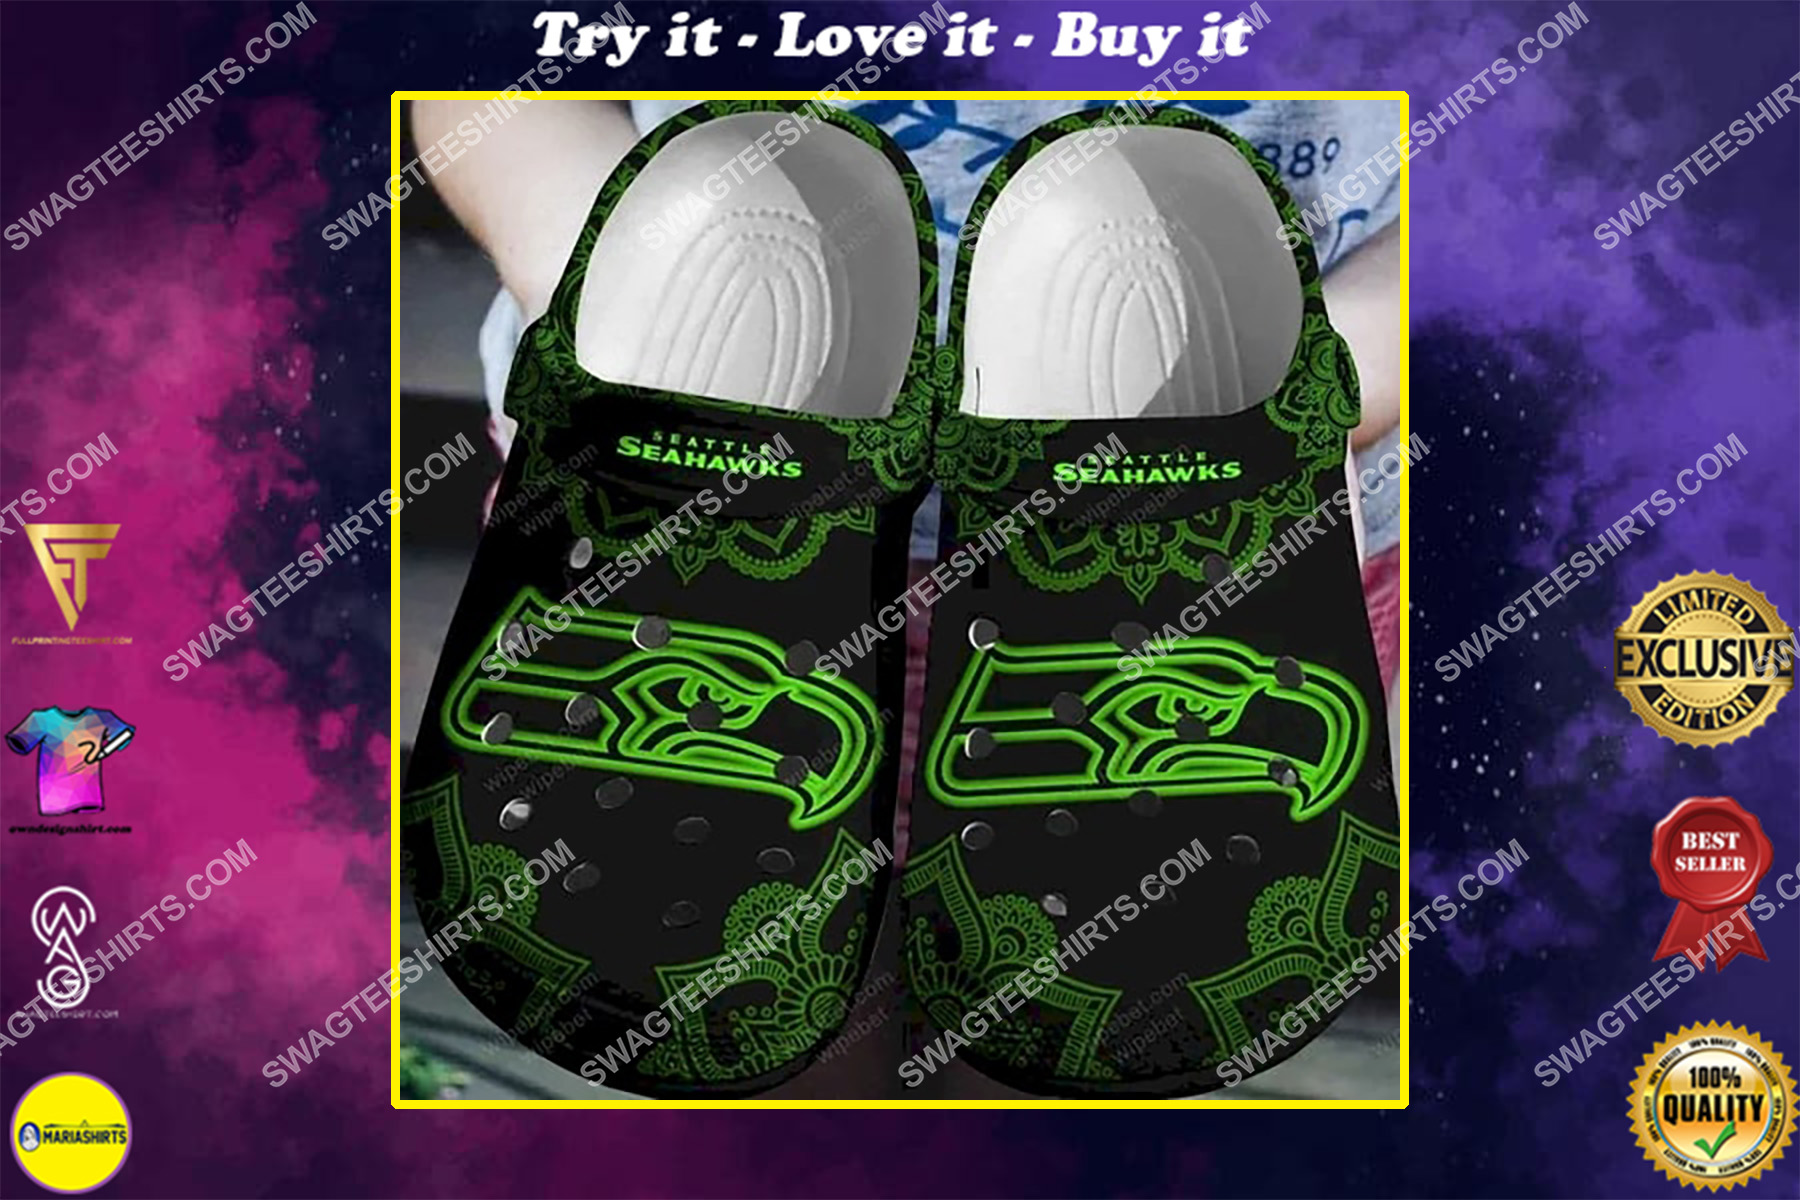 the seattle seahawks american football team all over printed crocs